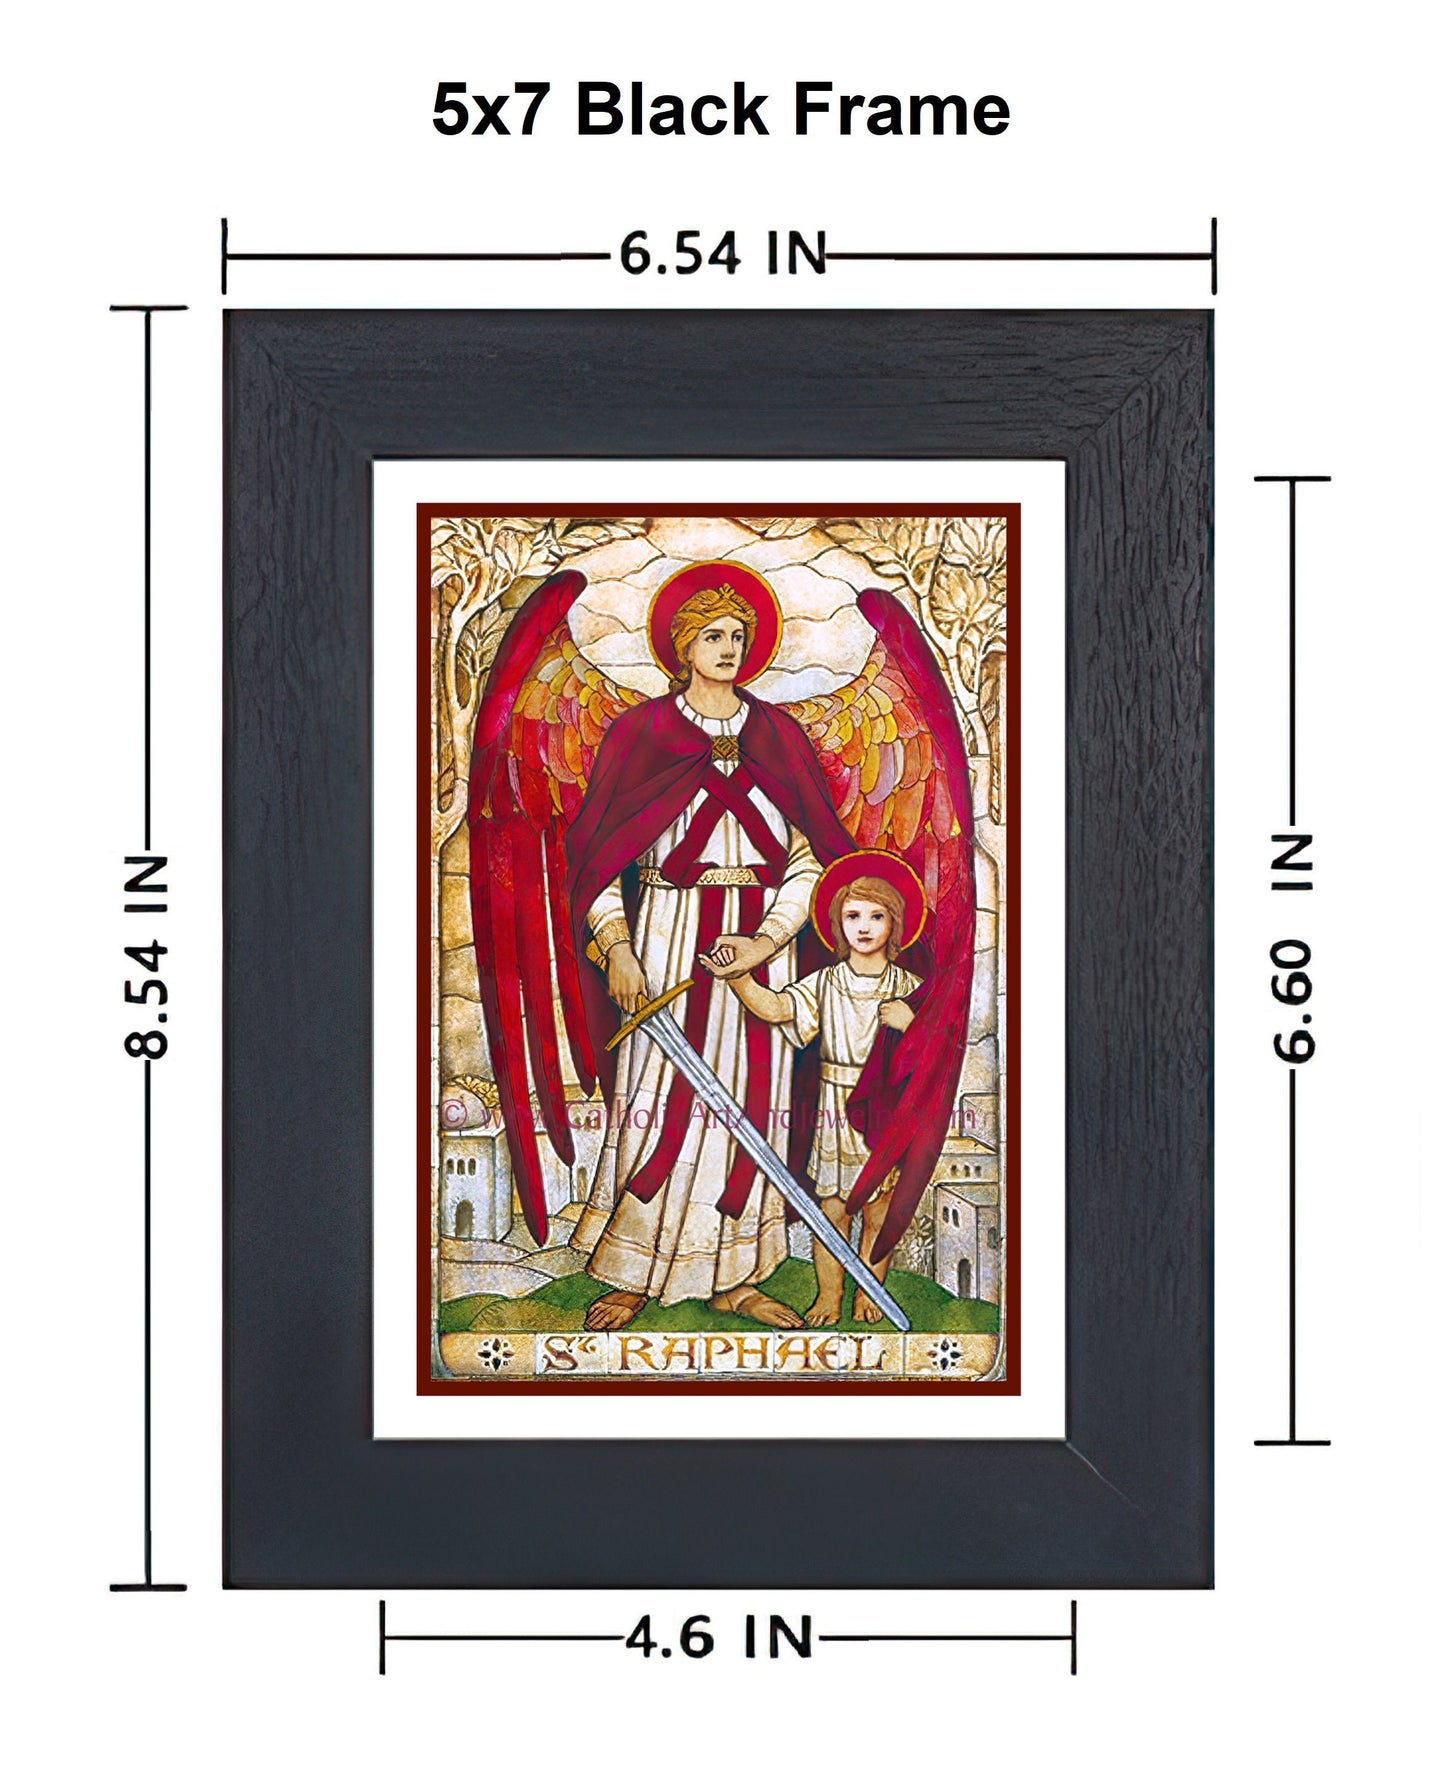 Archangel Raphael – from a Vintage Stained Glass Window – Art Nouveau – Catholic Art Print – Archival – Catholic Gift– Guardian Angel